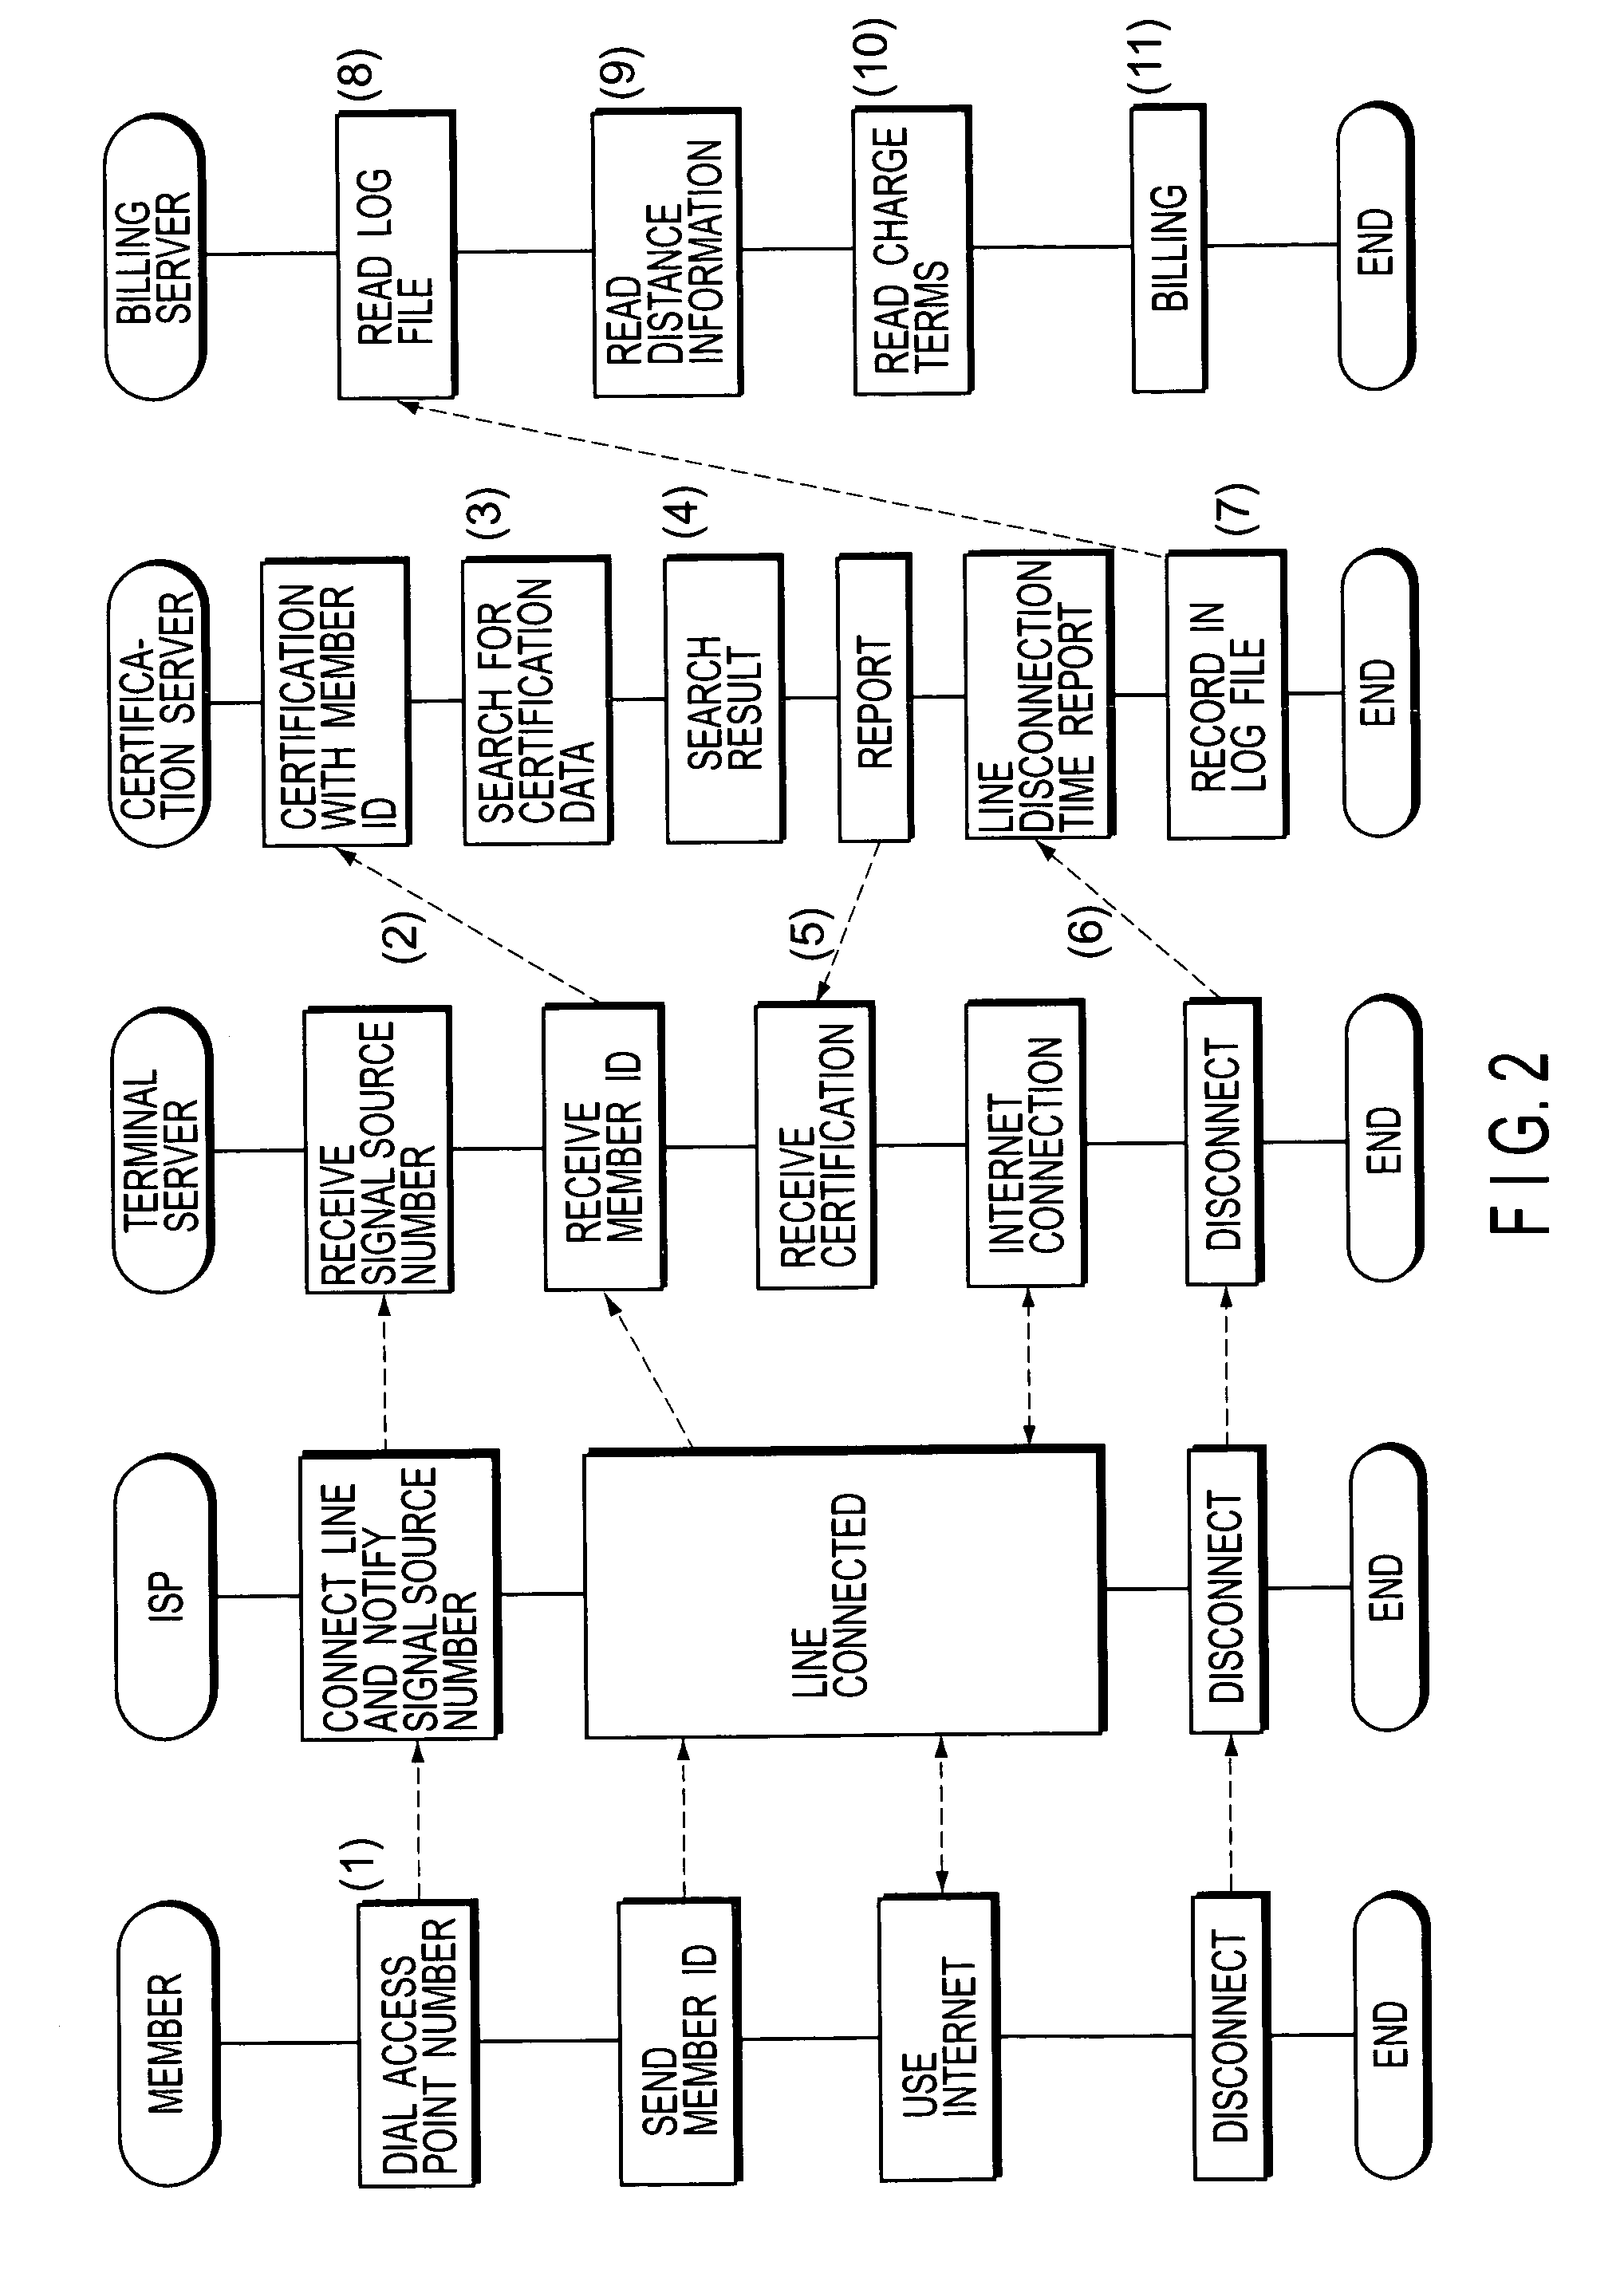 System for internet connections, method for calculating connection fees for network connection services, billing system for network connection services, and system for network connection management